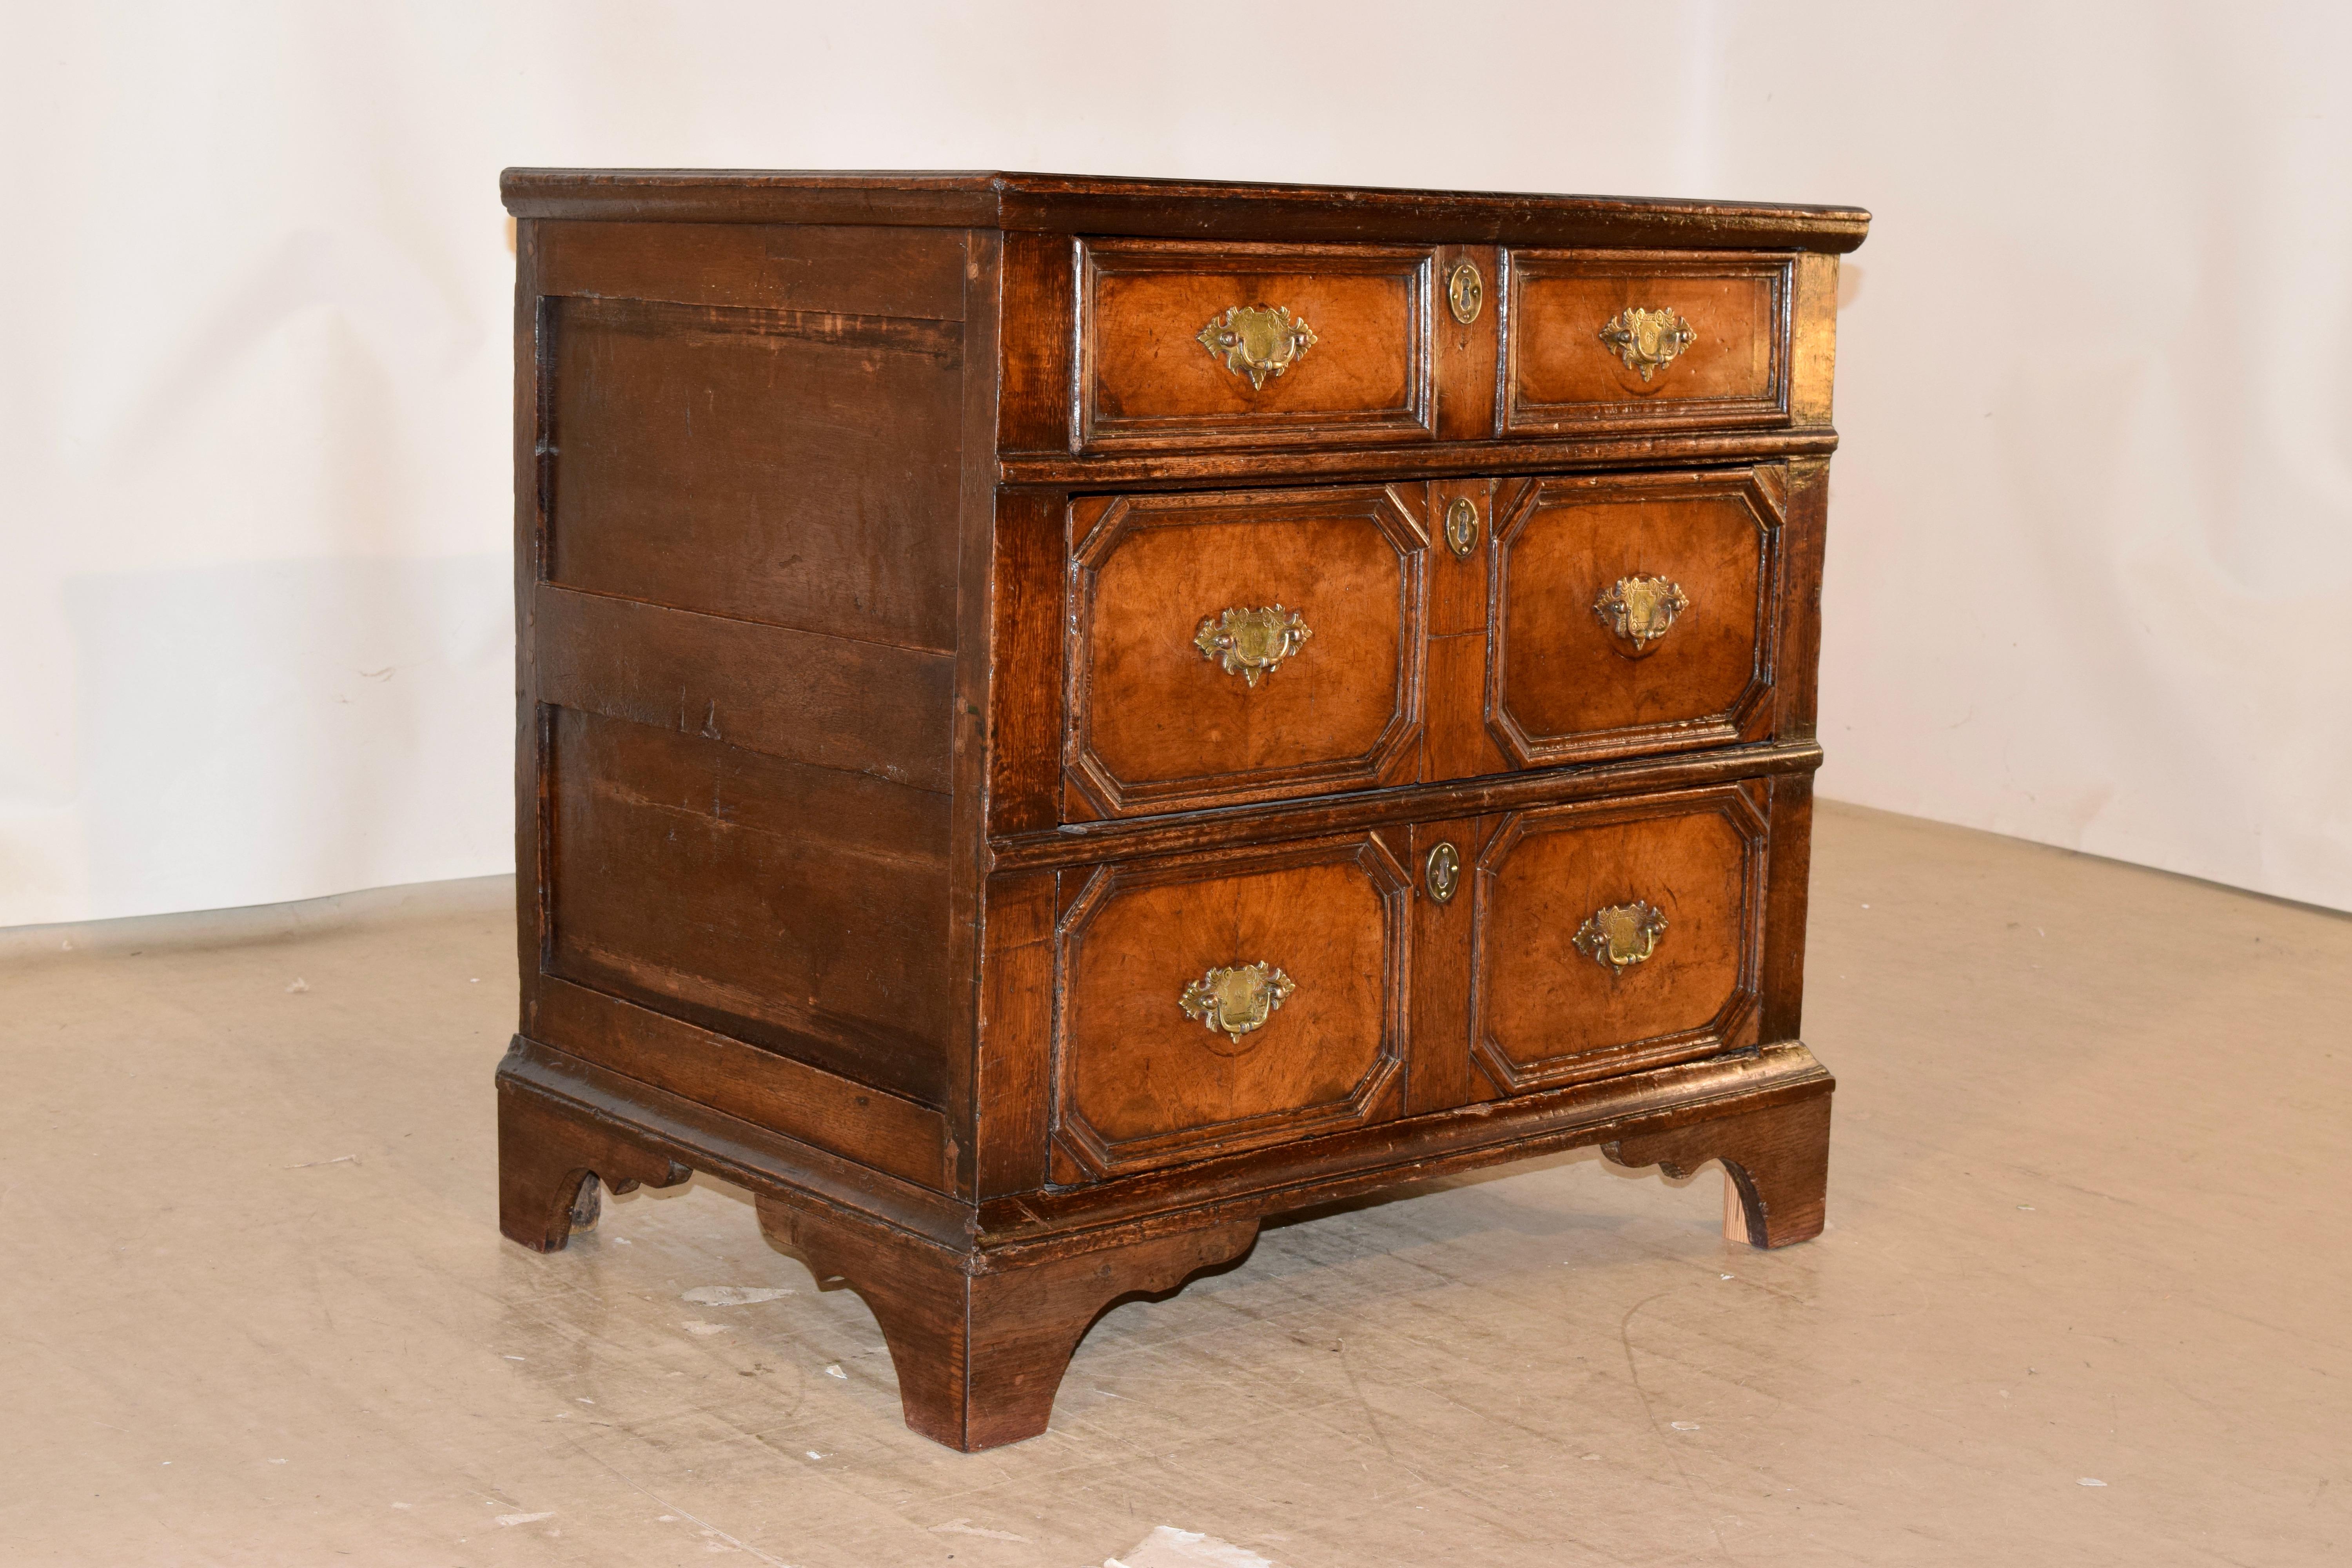 Third quarter 17th century English paneled chest of drawers made from walnut and oak. The top is made from oak planks and has a molded edge, following down to hand-paneled sides and three raised paneled drawers with burl walnut drawer fronts. The